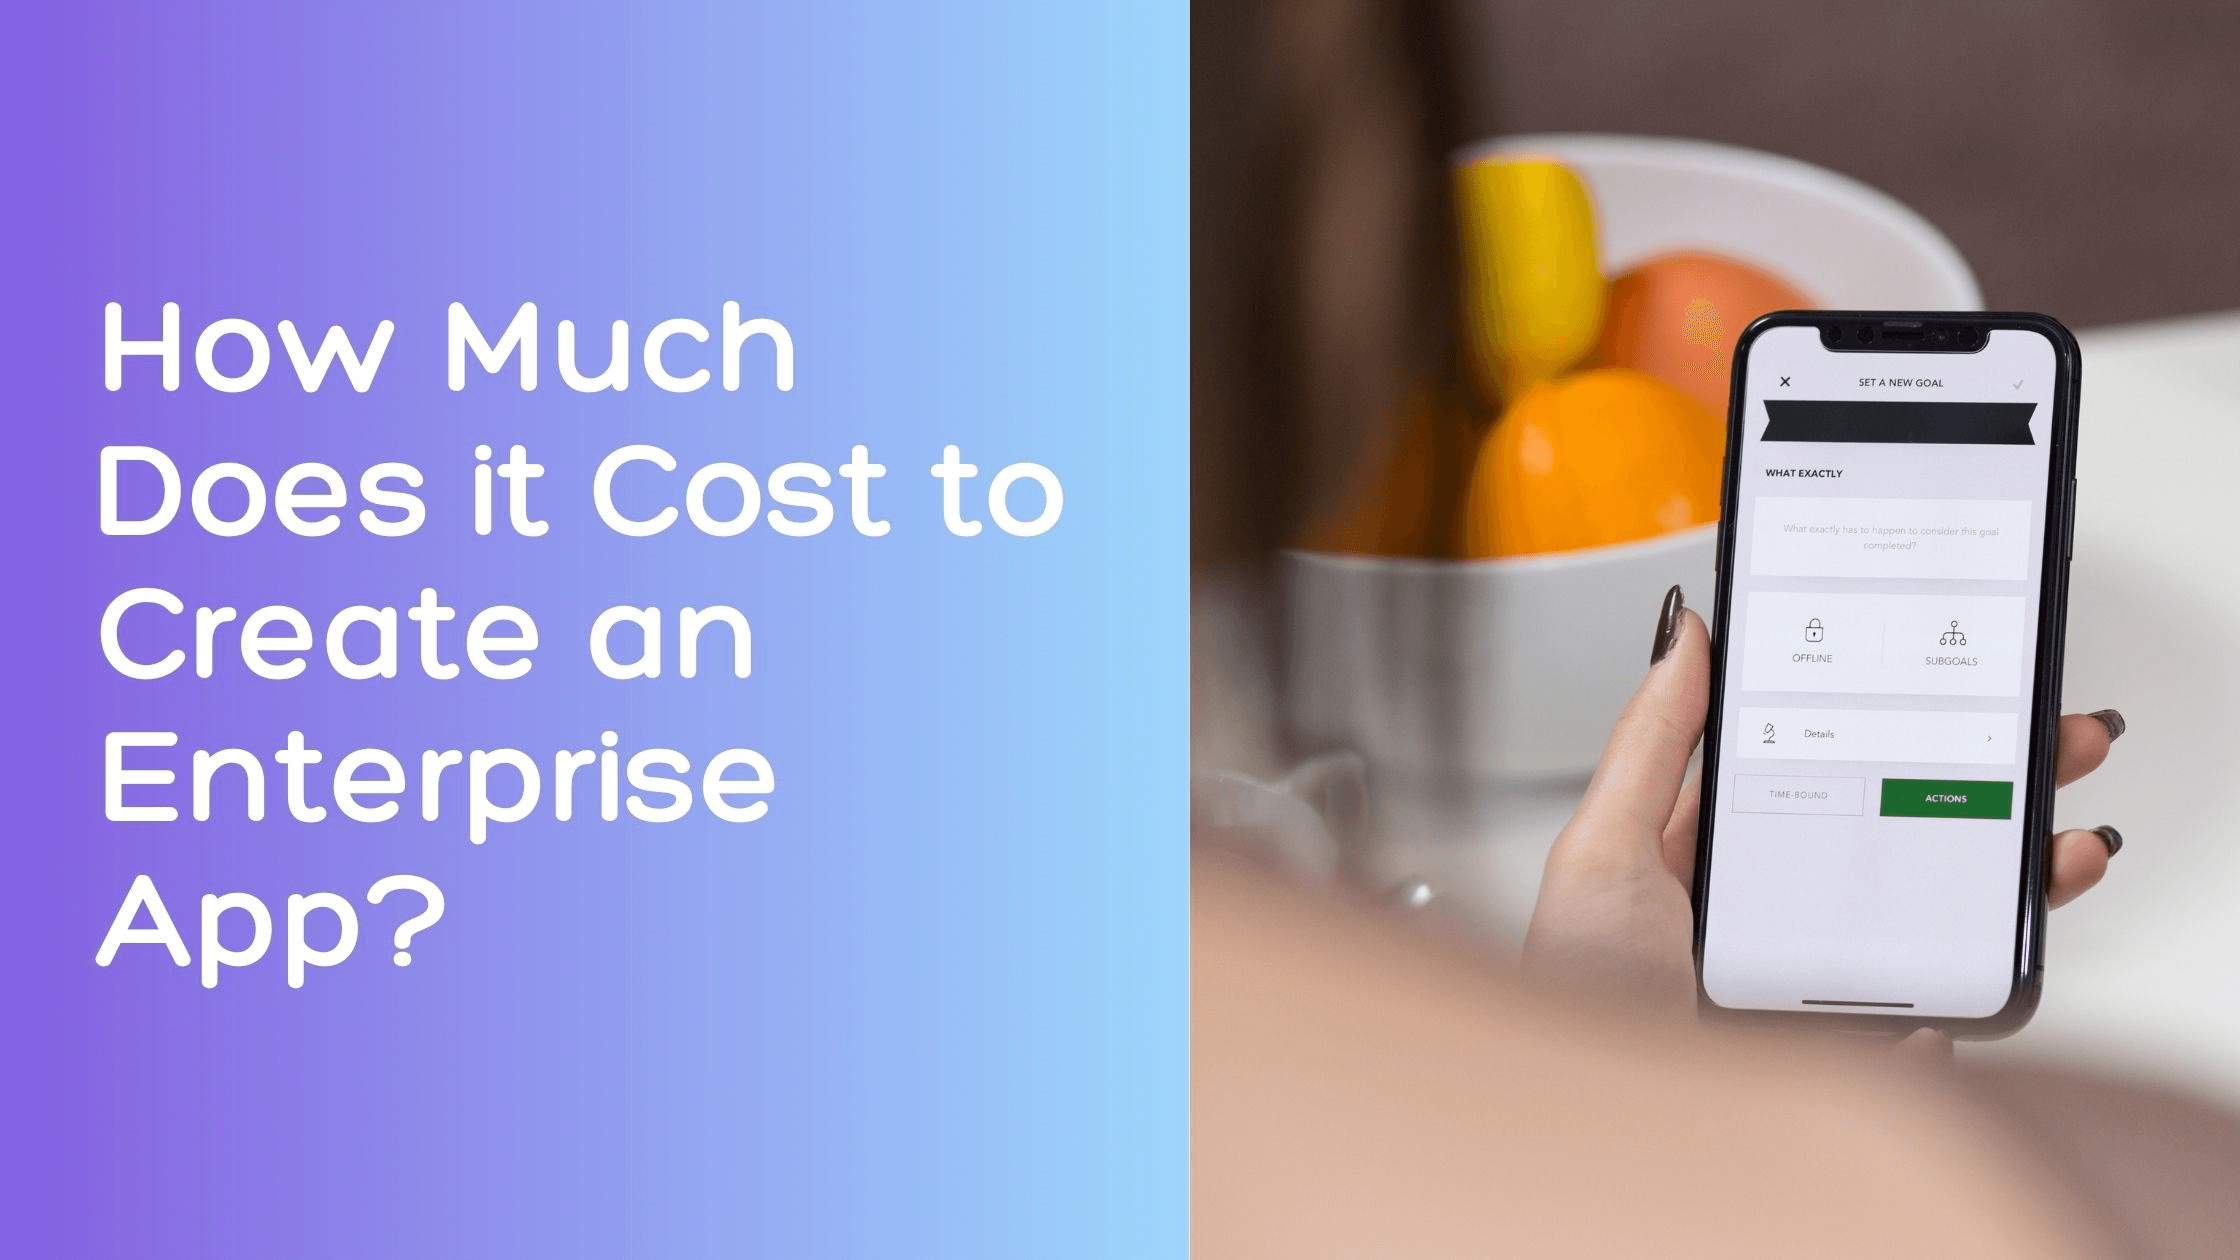 How Much Does it Cost to Create an Enterprise App